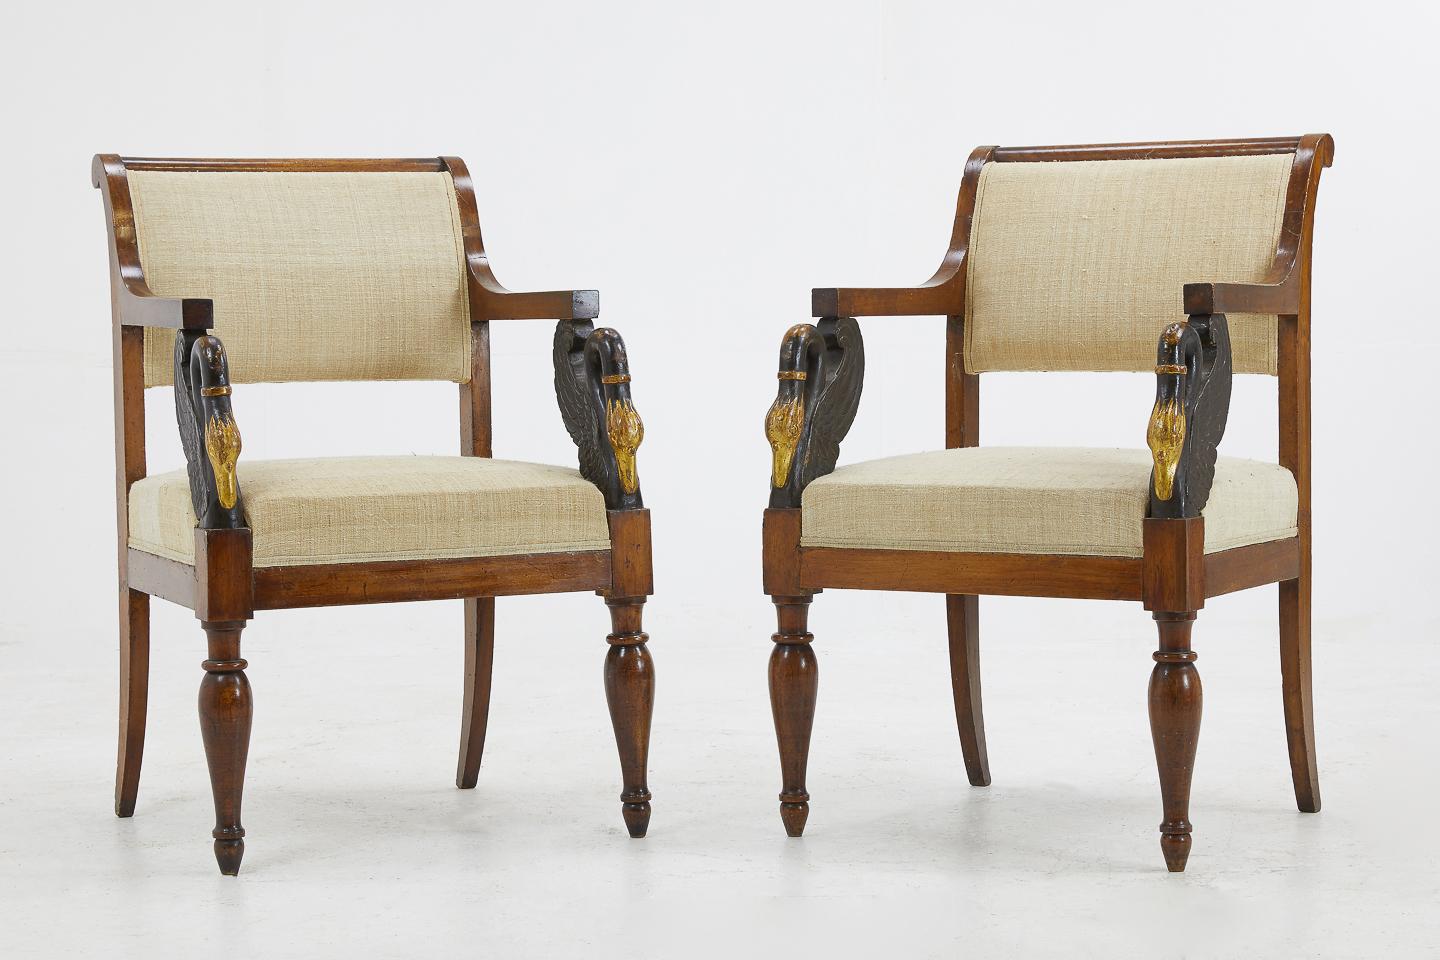 Hand-Carved Pair of Early 19th Century Italian Walnut and Ebonised Chairs with Gilding